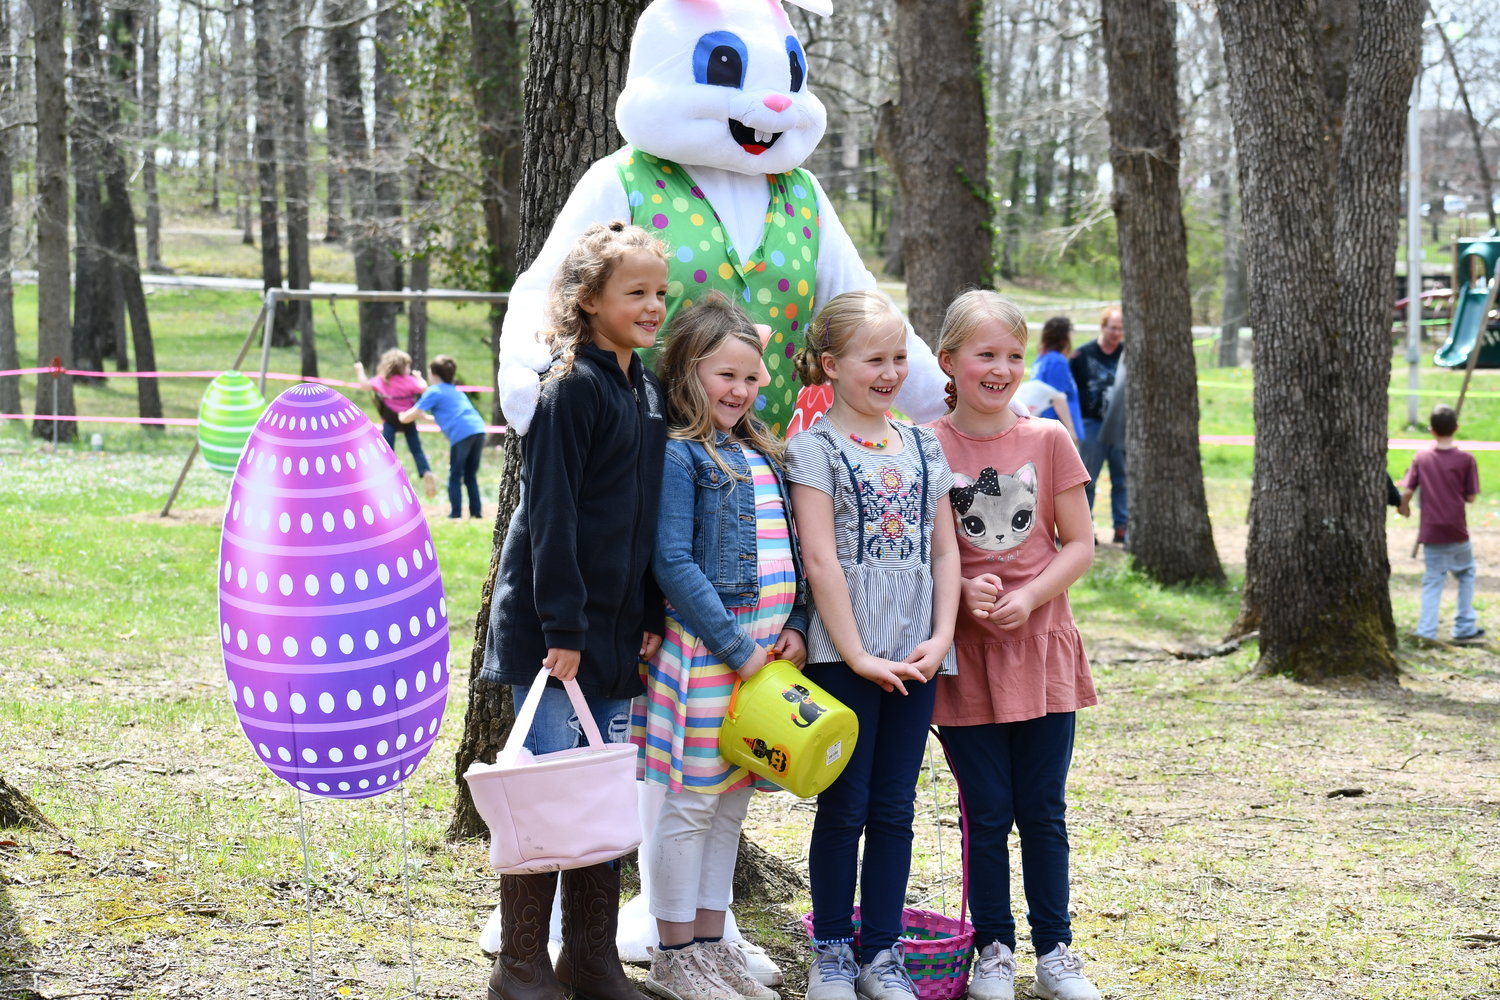 June Ward, Annallin Griswold, Leah Trantham and Lilly Trantham are excited to pose with the Easter Bunny.